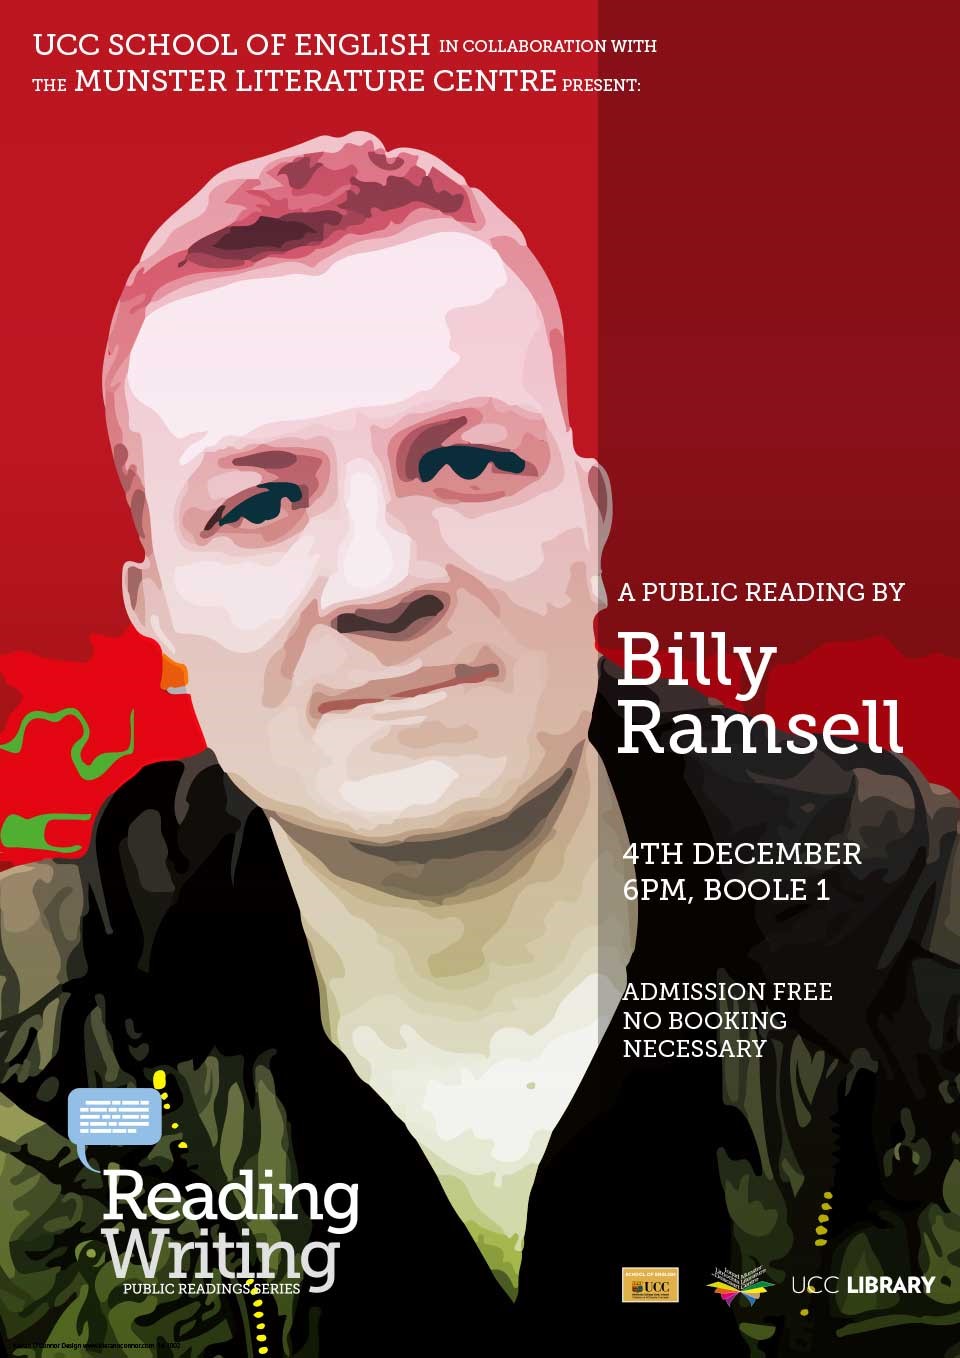 Public Reading by Billy Ramsell